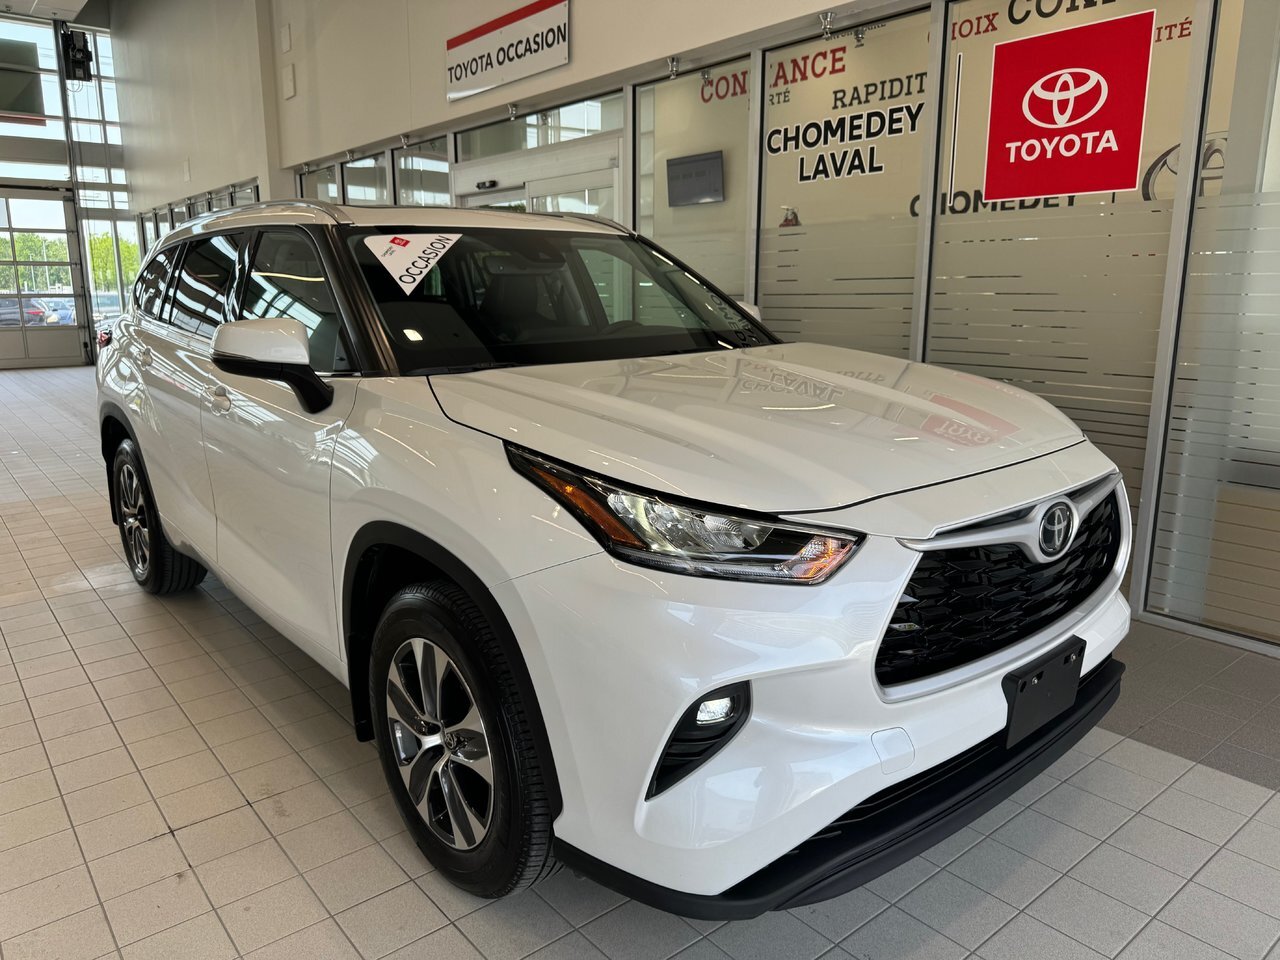 2022 Toyota Highlander XLE AWD 7 Places Toit Ouvrant Cuir Bluetooth Camer